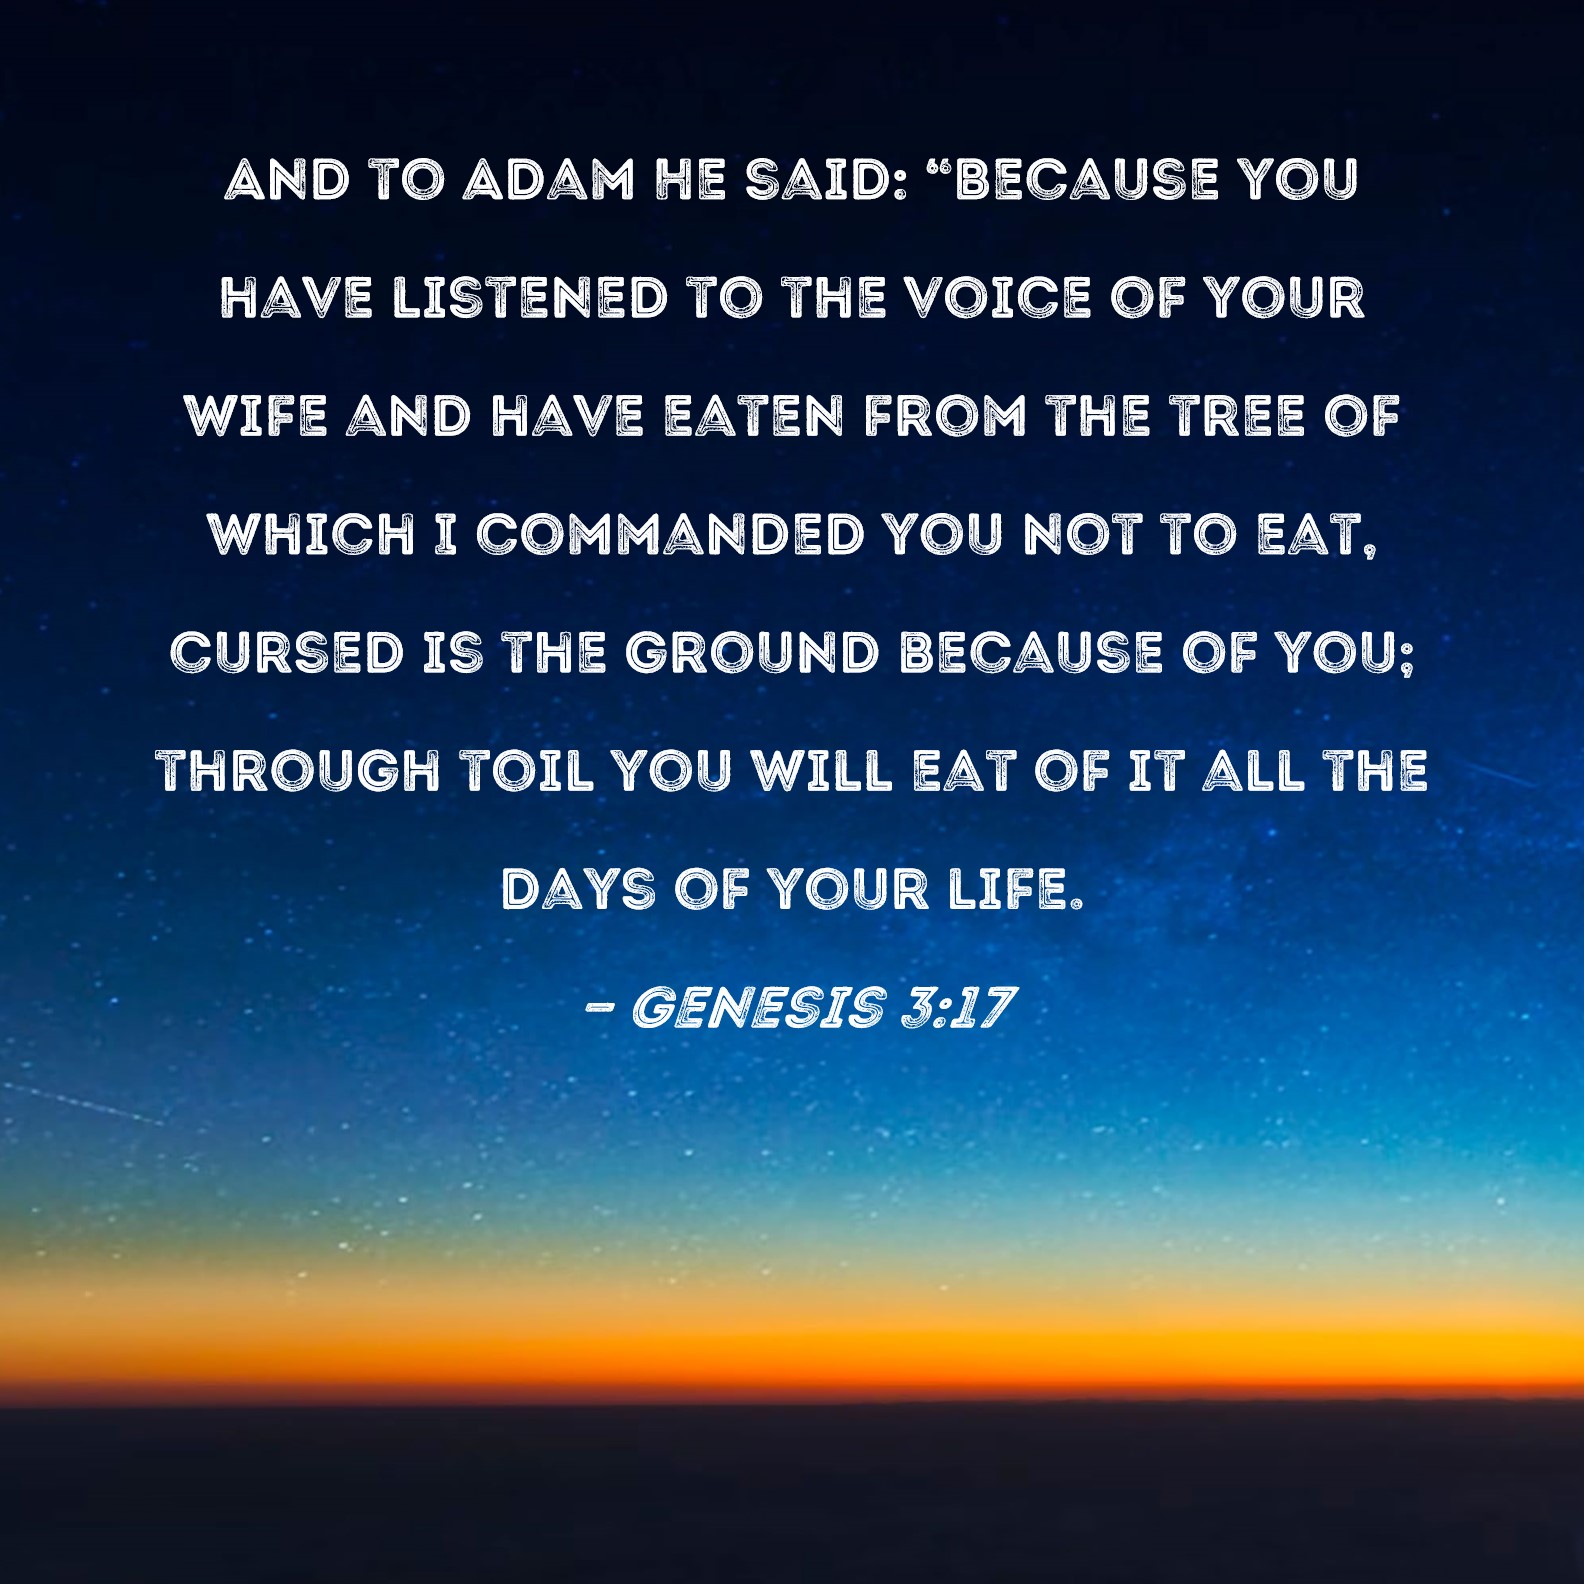 Genesis 3:17 And to Adam He said: Because you have listened to